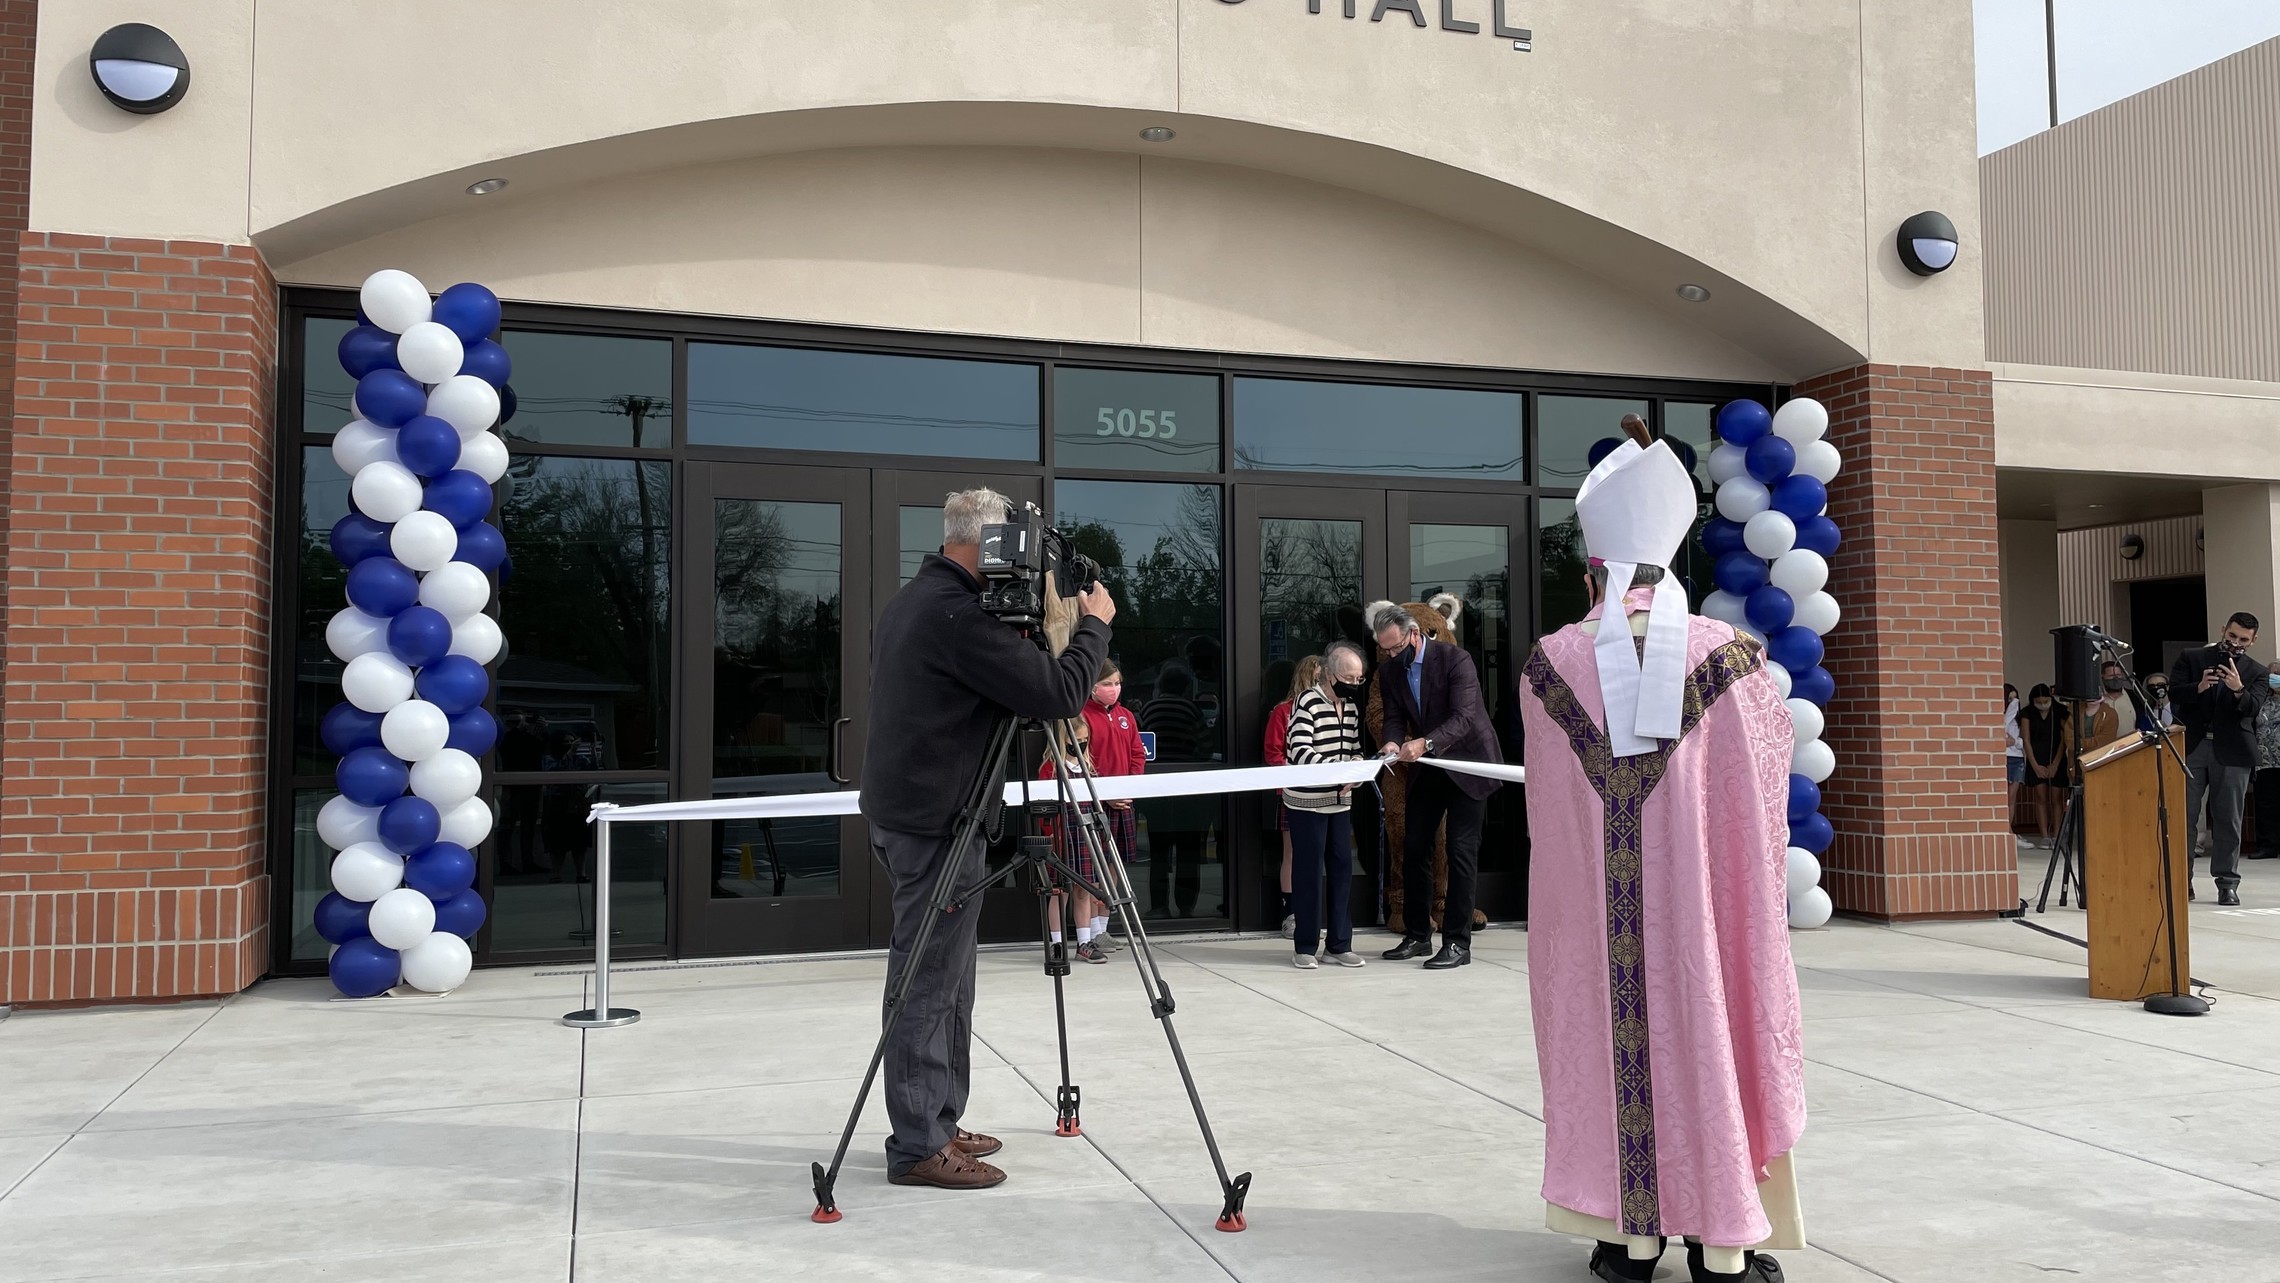 Nancy Affinito cutting the ribbon for Affinito Hall.